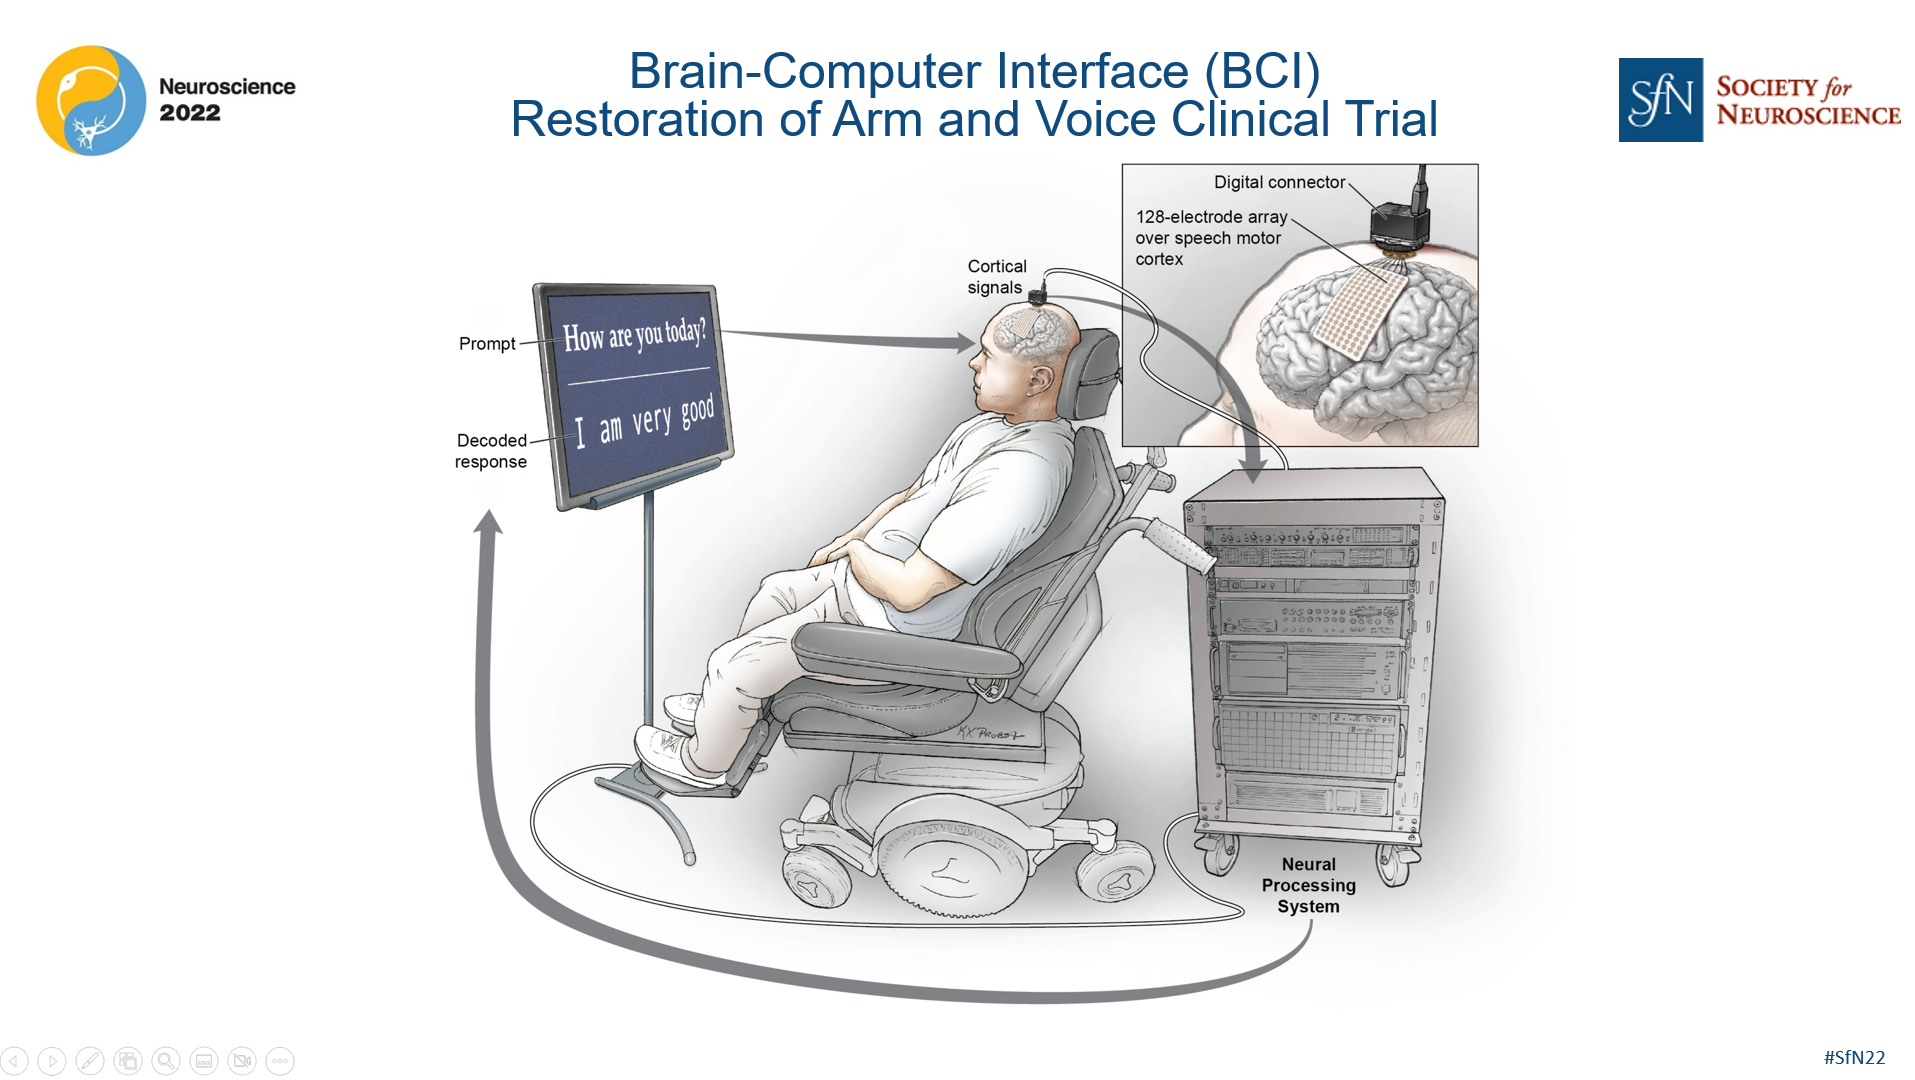 image showing the Brain-Computer Interface Restoration of Arm and Voice Clinical Trial